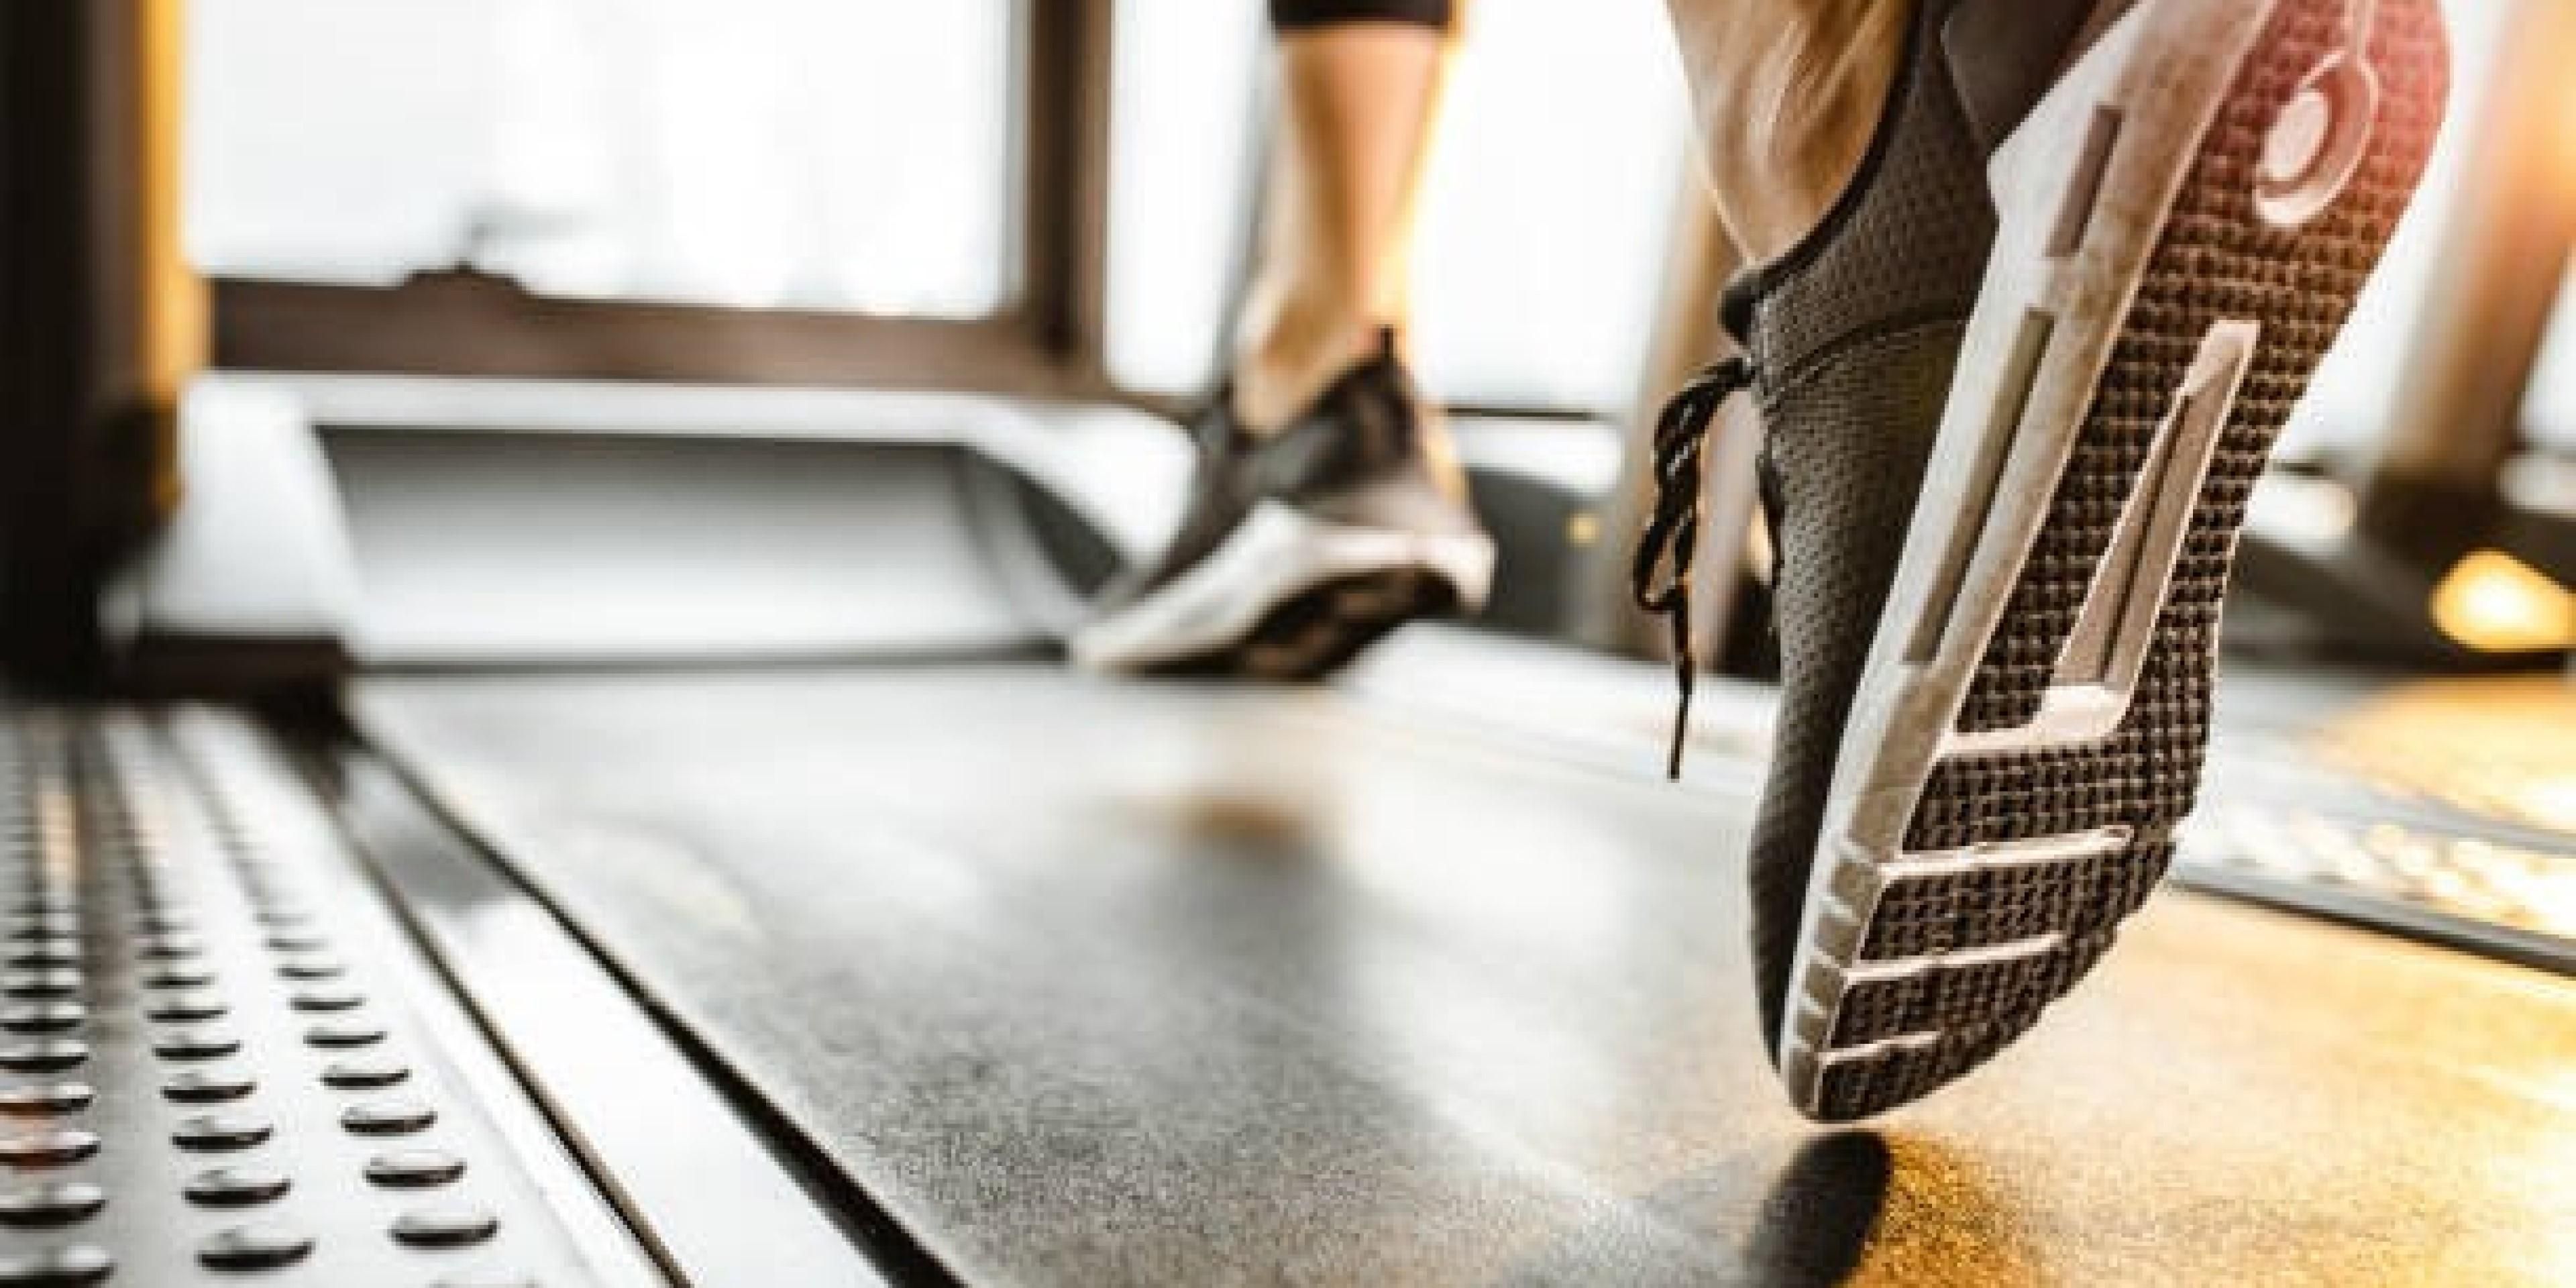 Get your sweat on in our complimentary, fully equipped fitness center with two treadmills and a stationary bike open 24 hours a day.